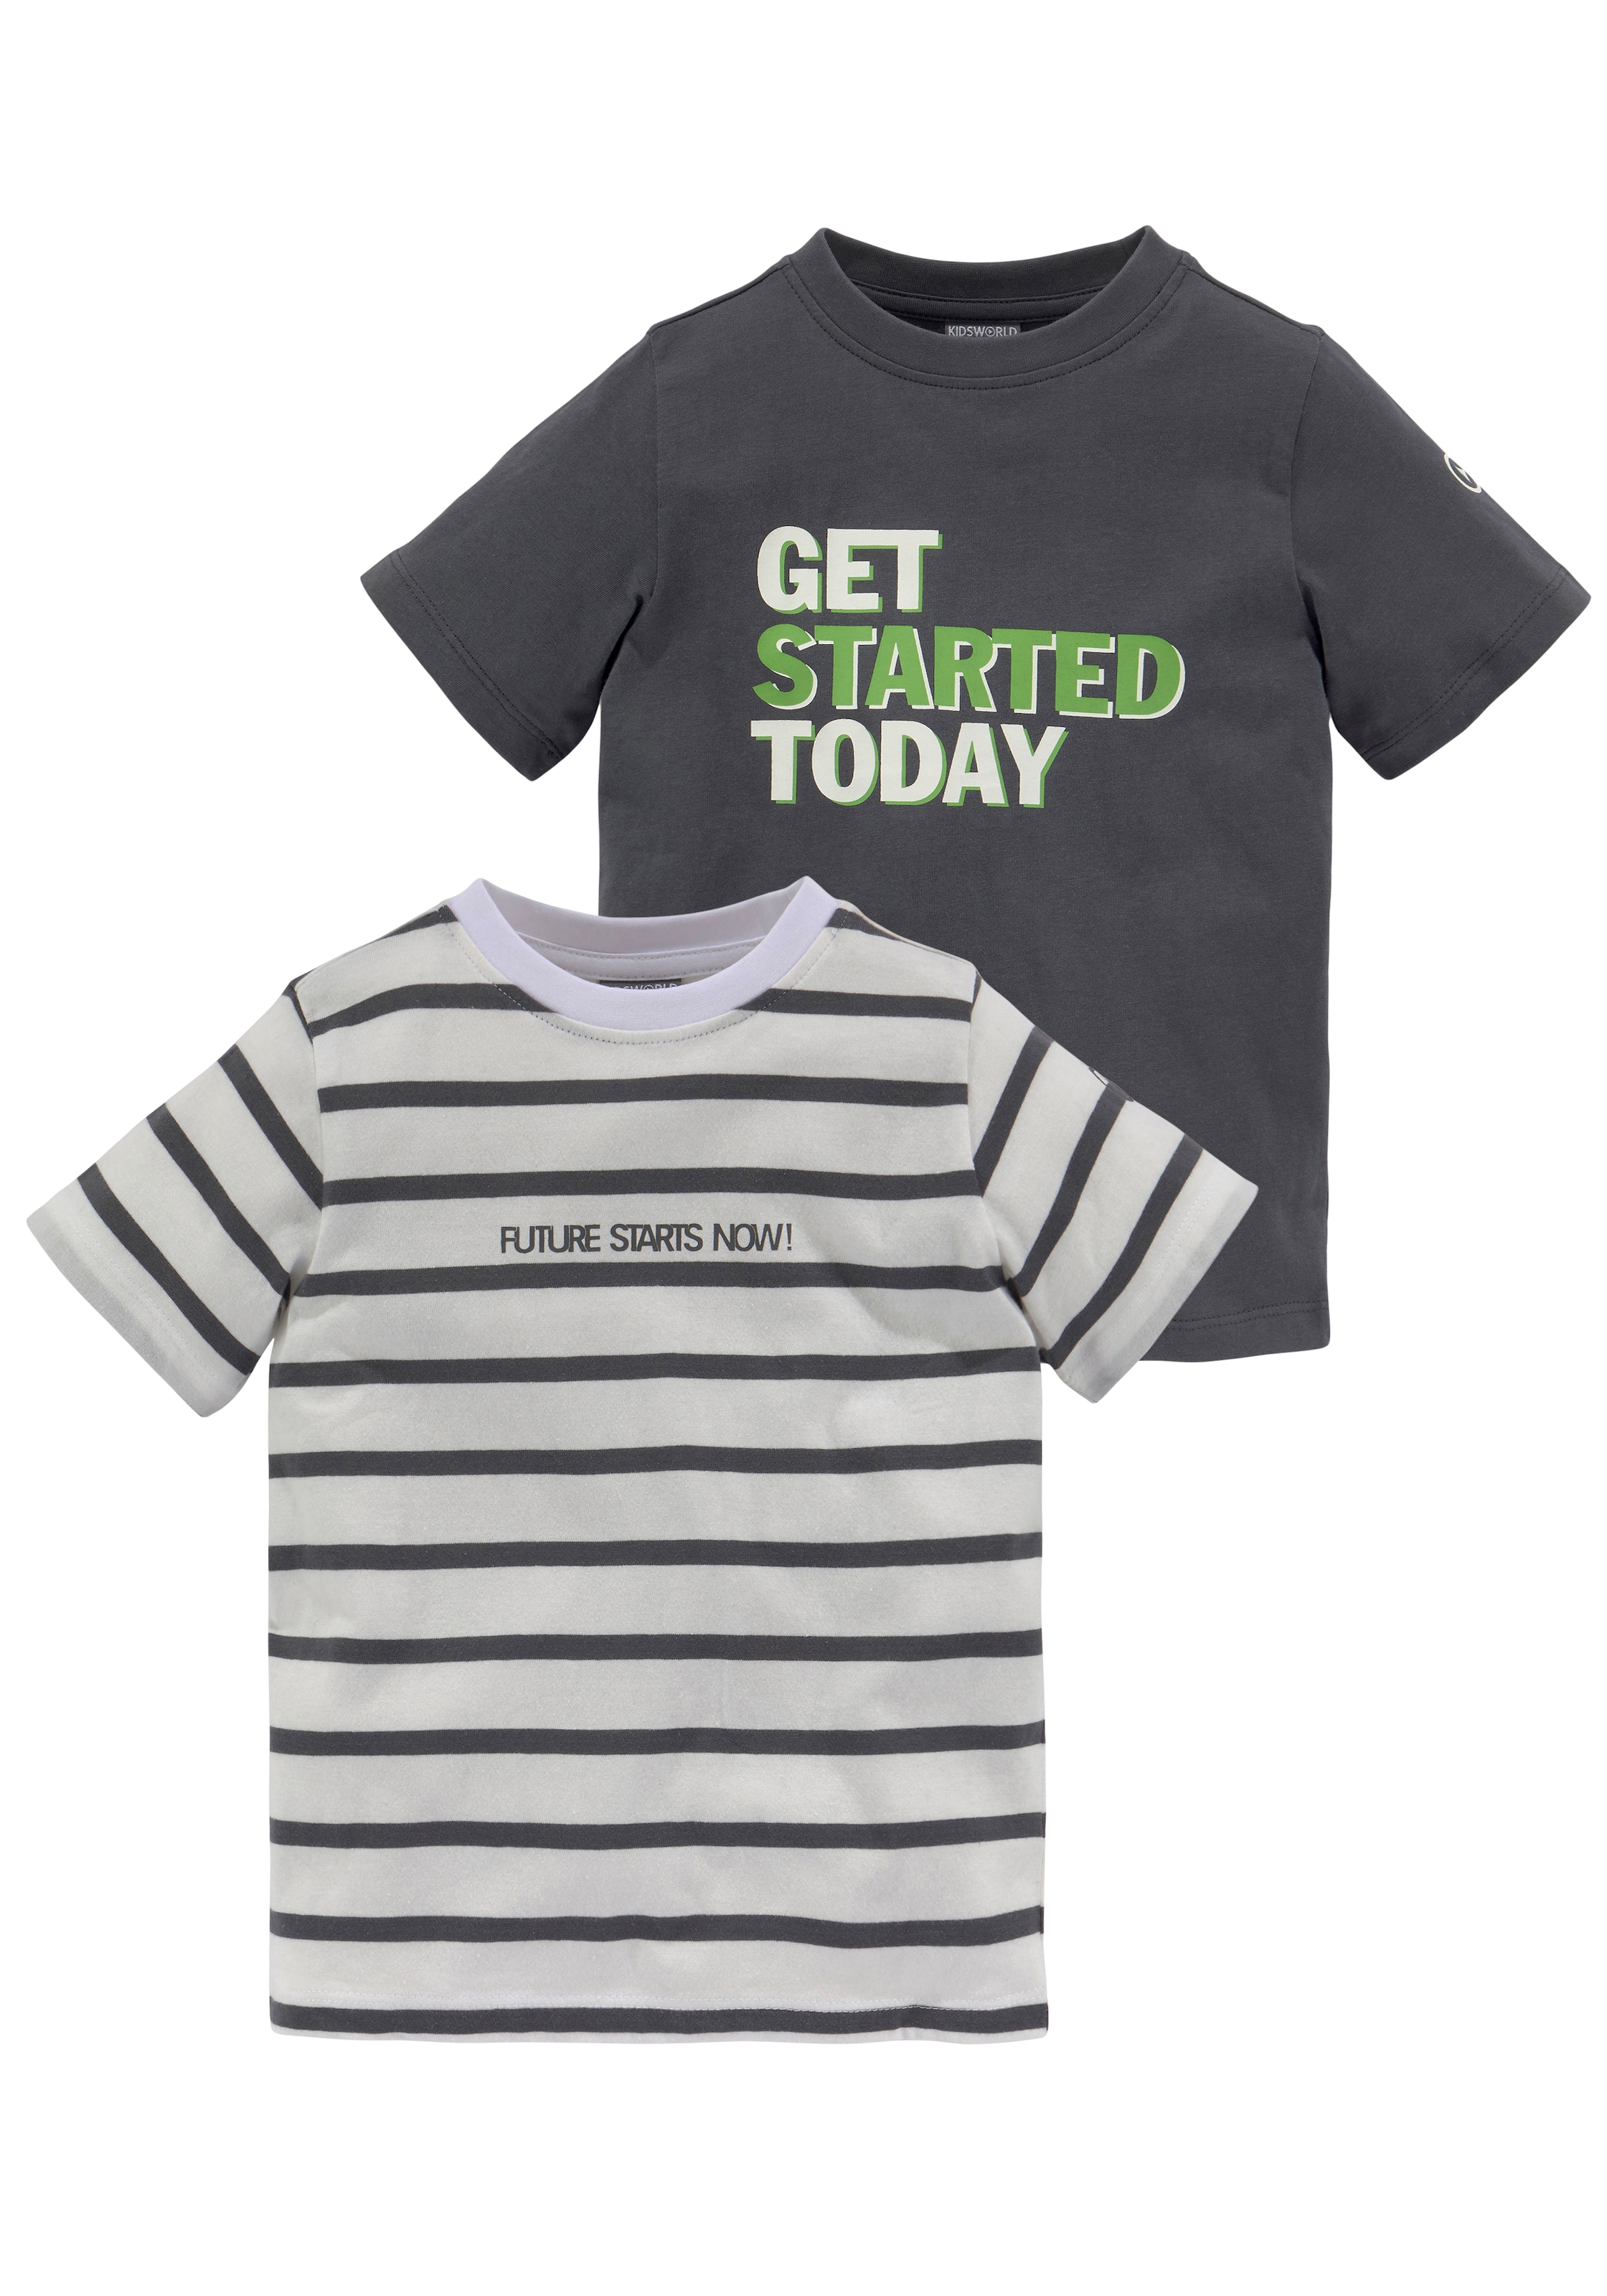 2 T-Shirt Sprücheshirts IS KIDSWORLD (Packung, TOO bei »TOMORROW tlg.), LATE«,